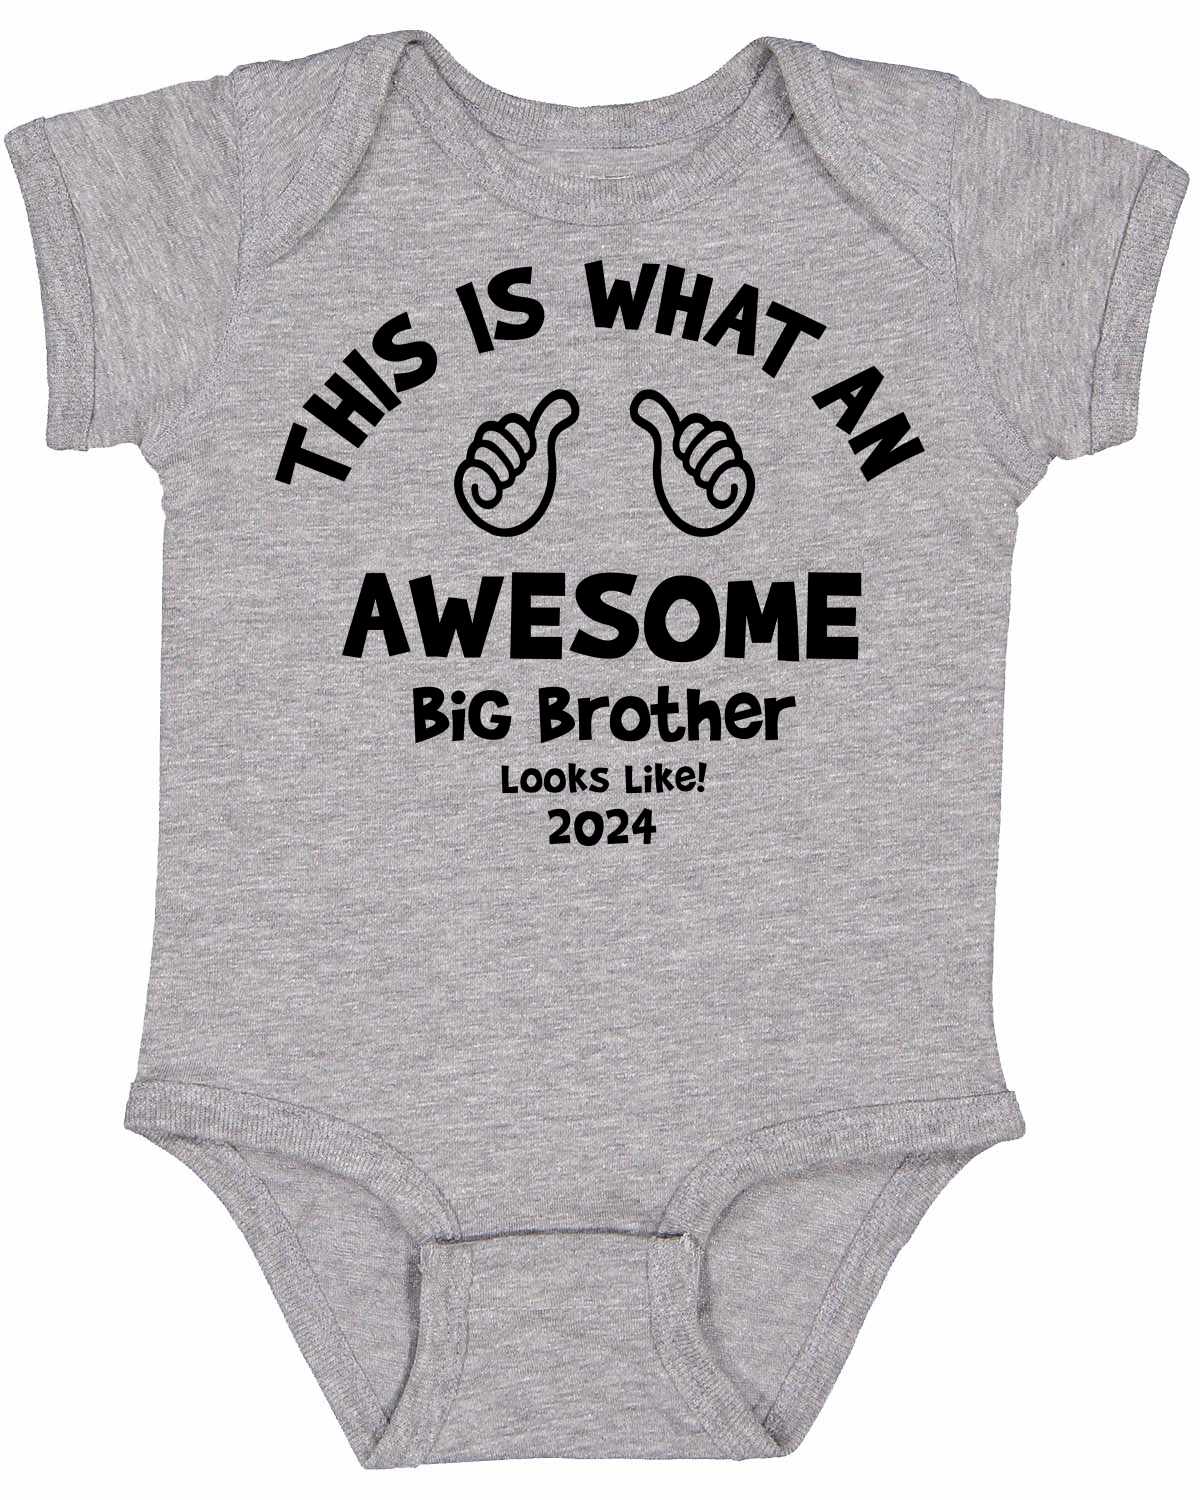 Awesome Big Brother in 2024 on Infant BodySuit